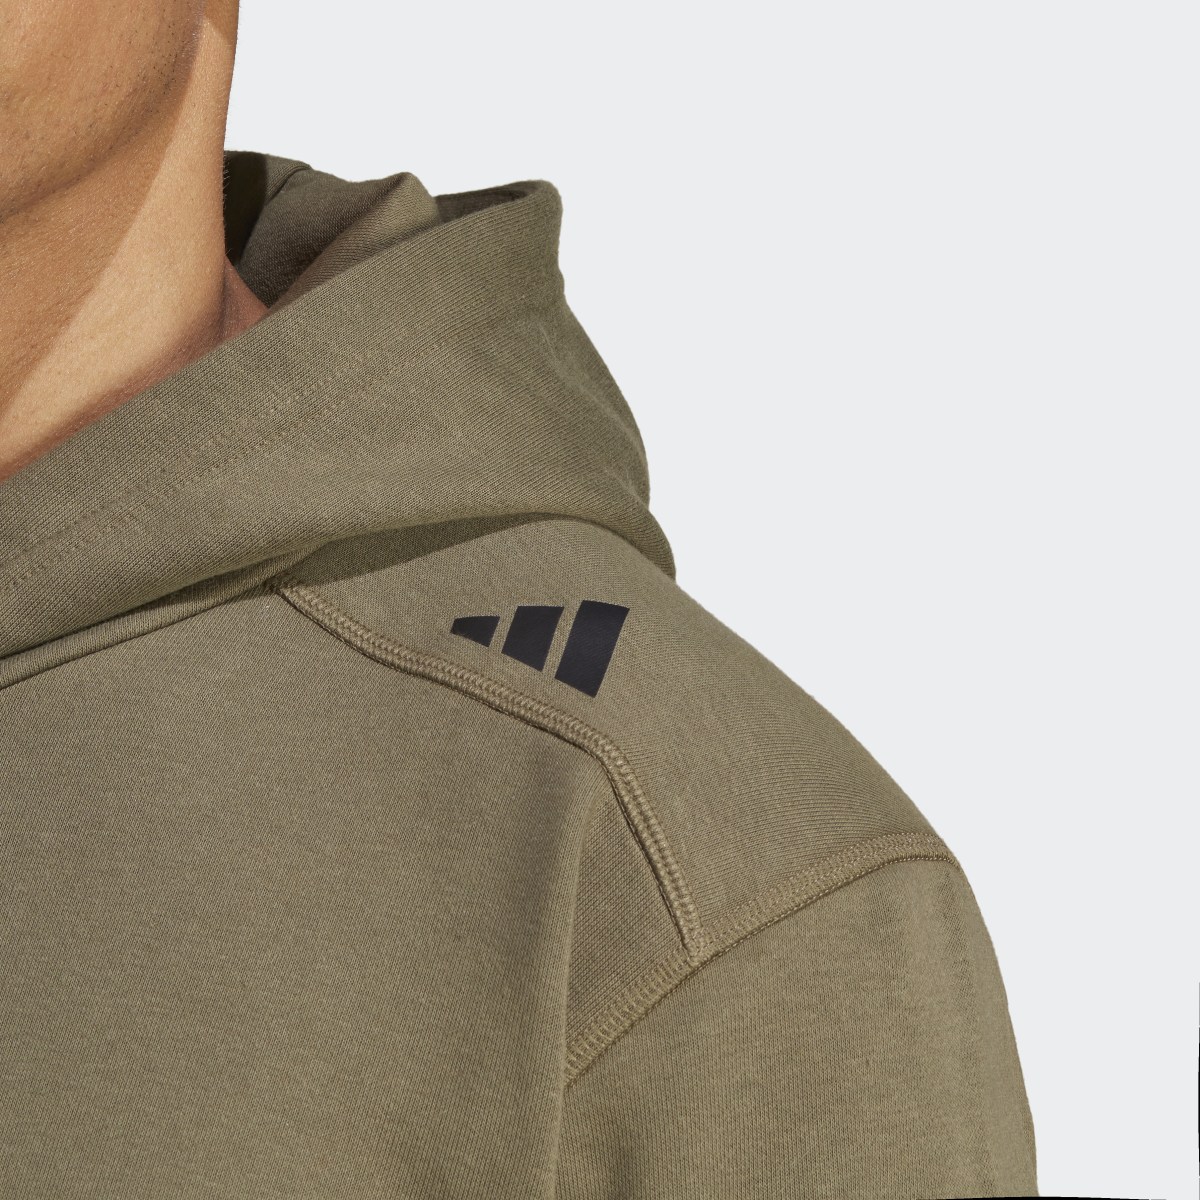 Adidas Curated by Cody Rigsby HIIT Hoodie. 7